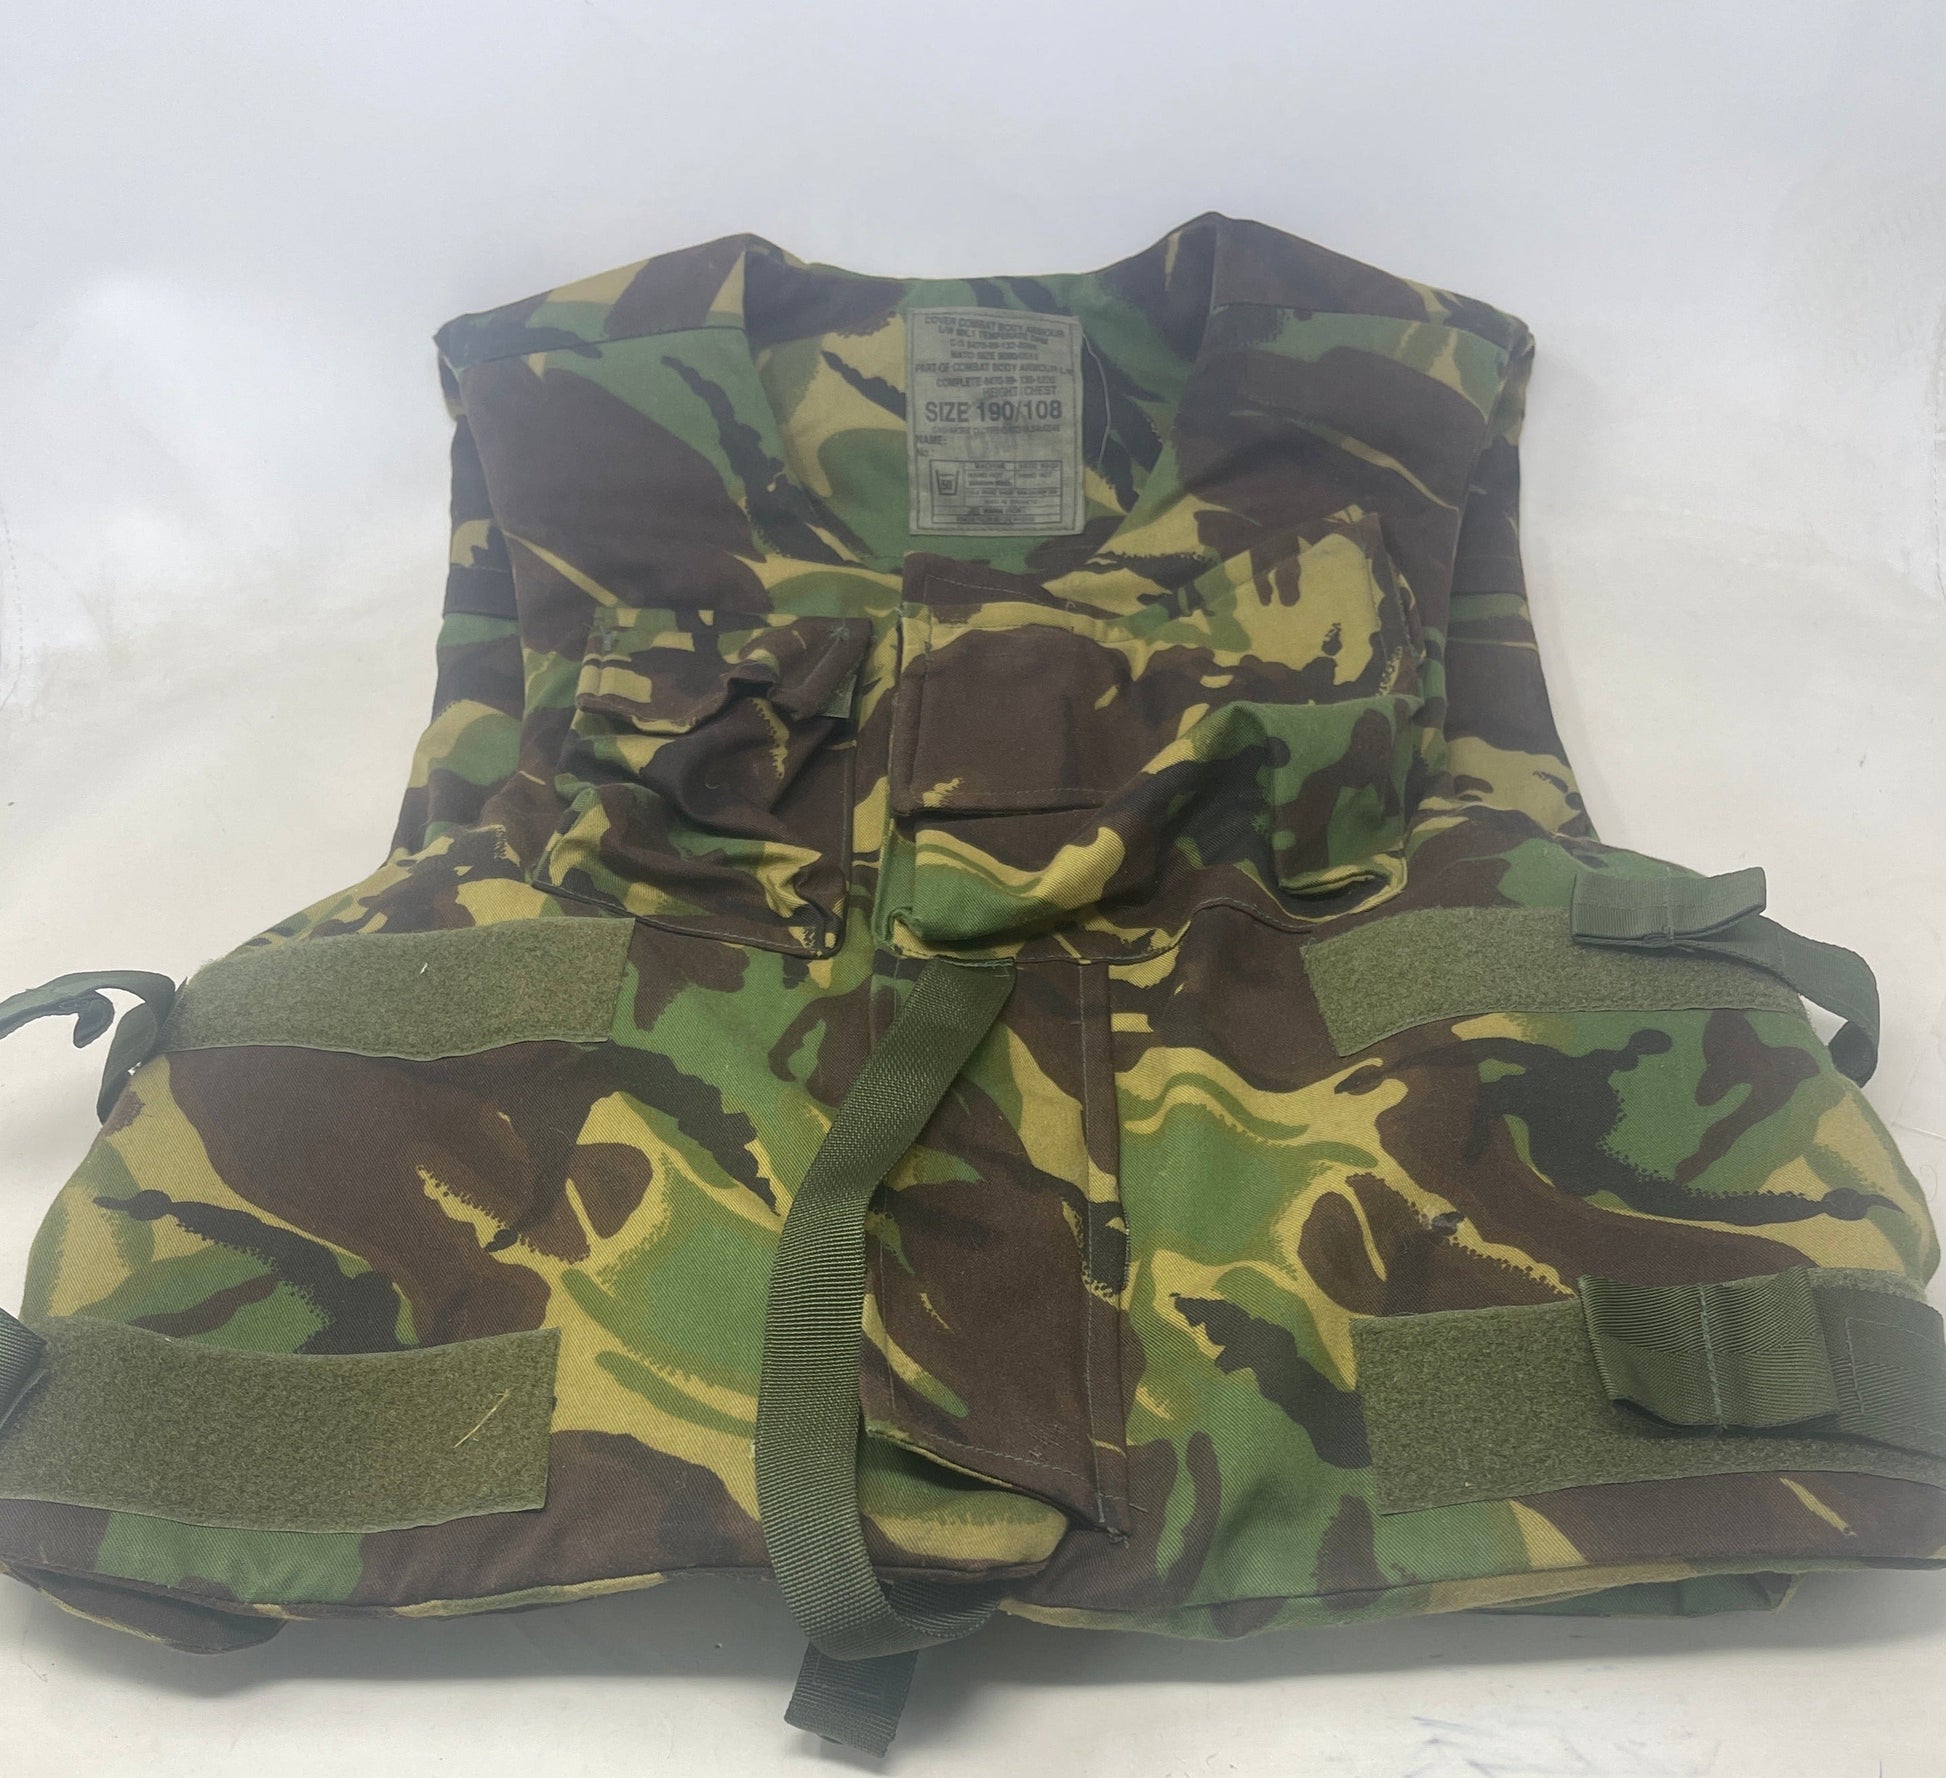 British Army ECBA Body Armour with SOFT FILLER DPM Temperate Cover 190/108